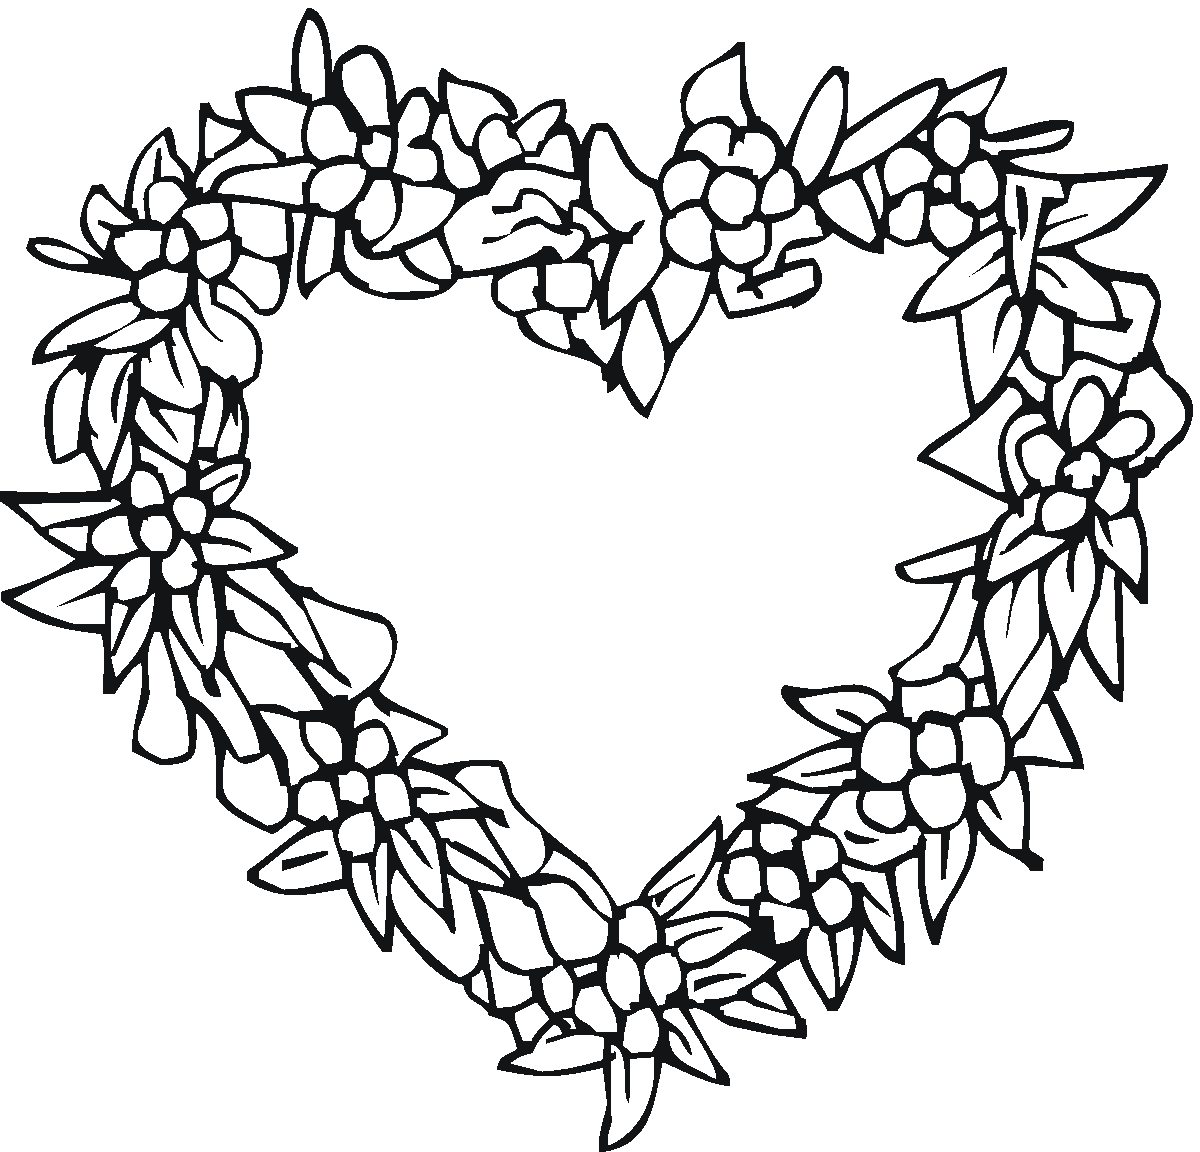 coloring pages of a heart heart coloring page crafting the word of god a of coloring pages heart 